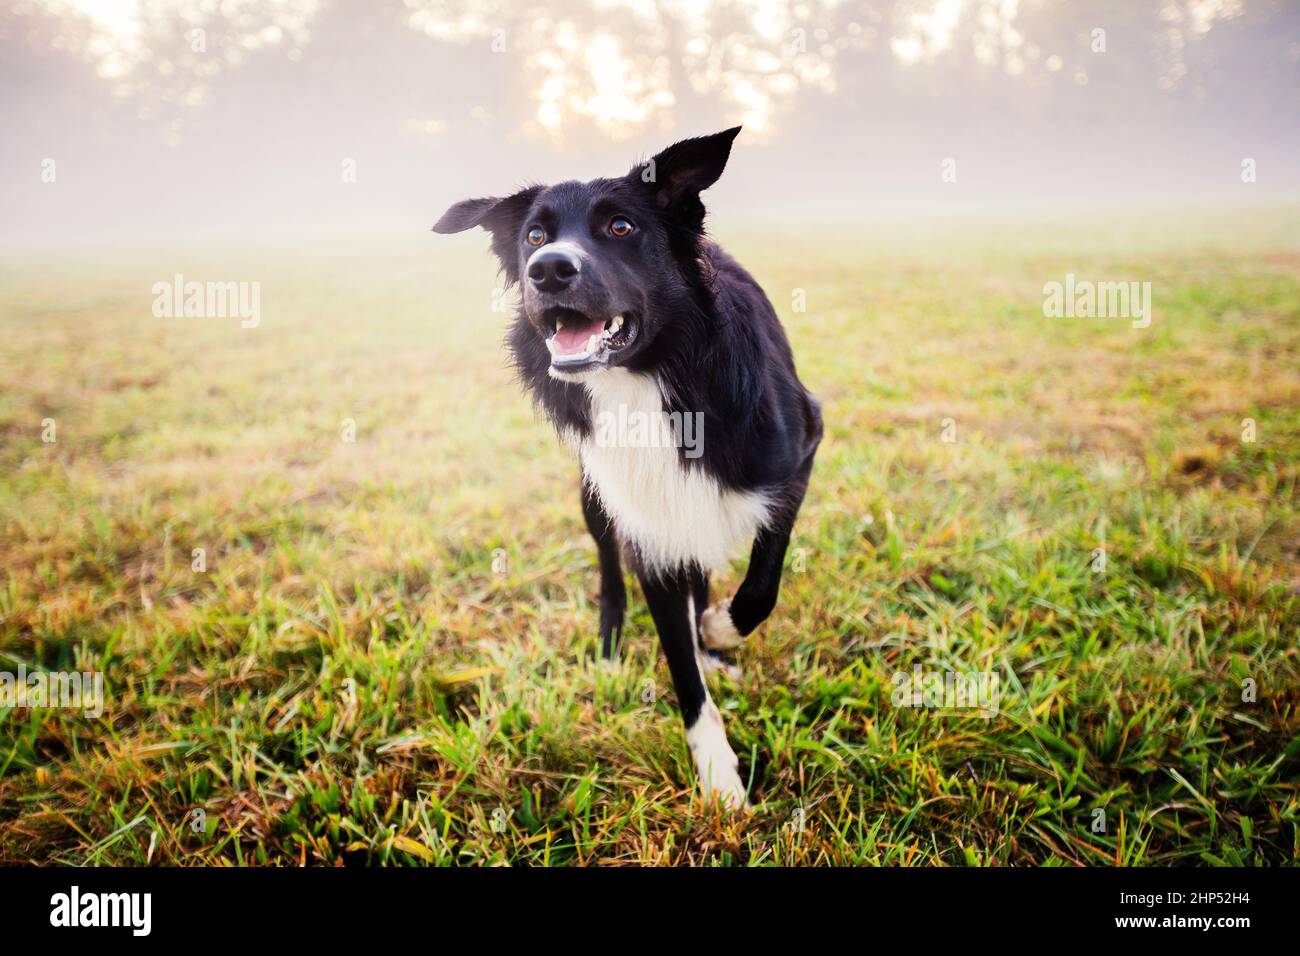 Border Collie Dog obedience training in city park in a sunny day. Border Collie playing on green grass in city park without leash. A purebred Border C Stock Photo